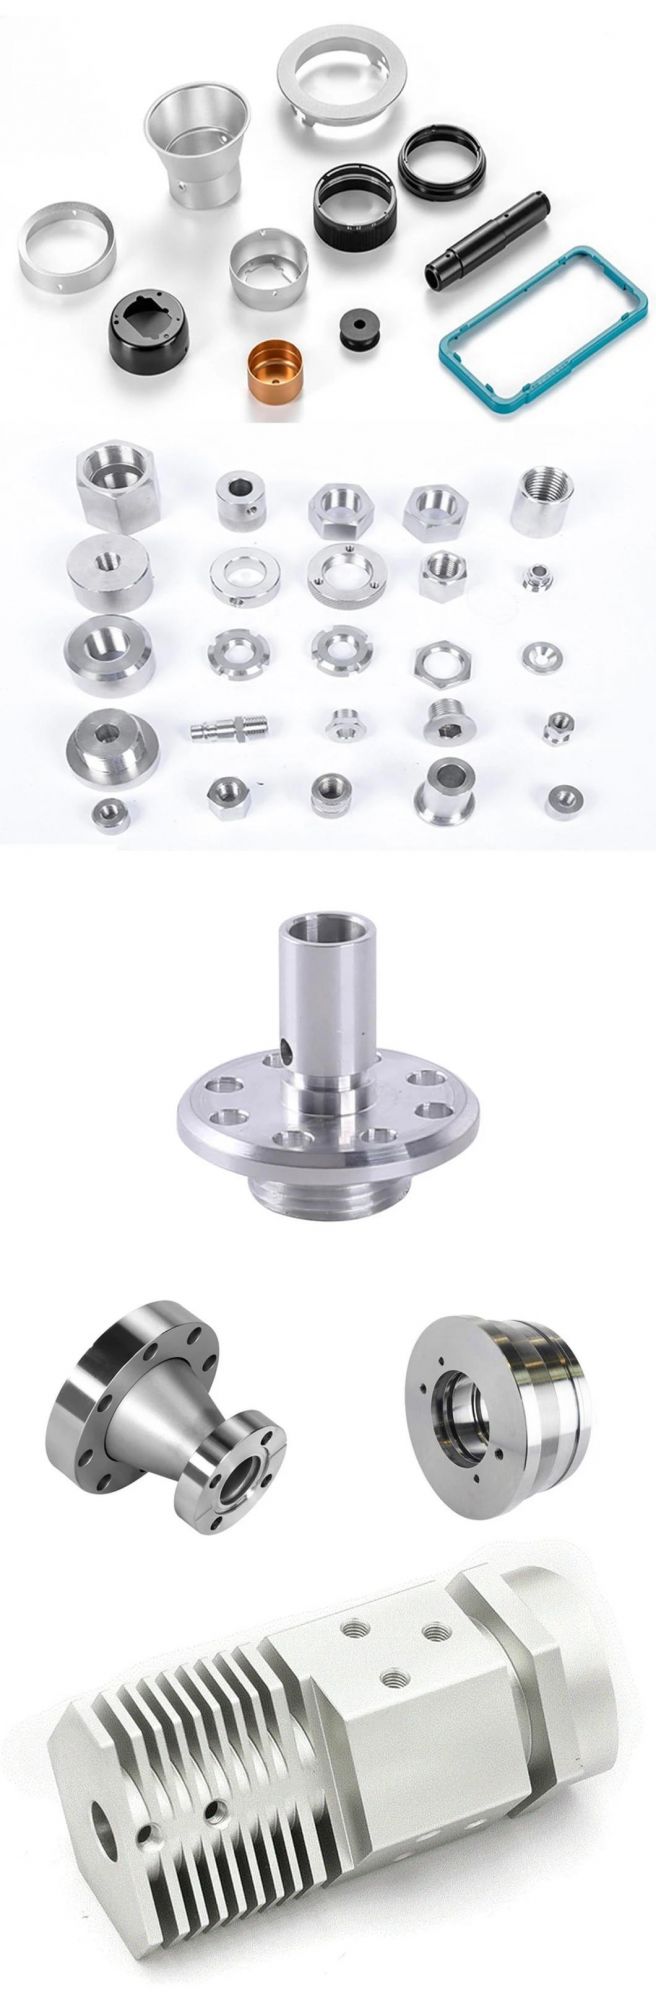 Monthly Deals OEM Aluminum Stainless Steel CNC Milling Services CNC Manufacturing